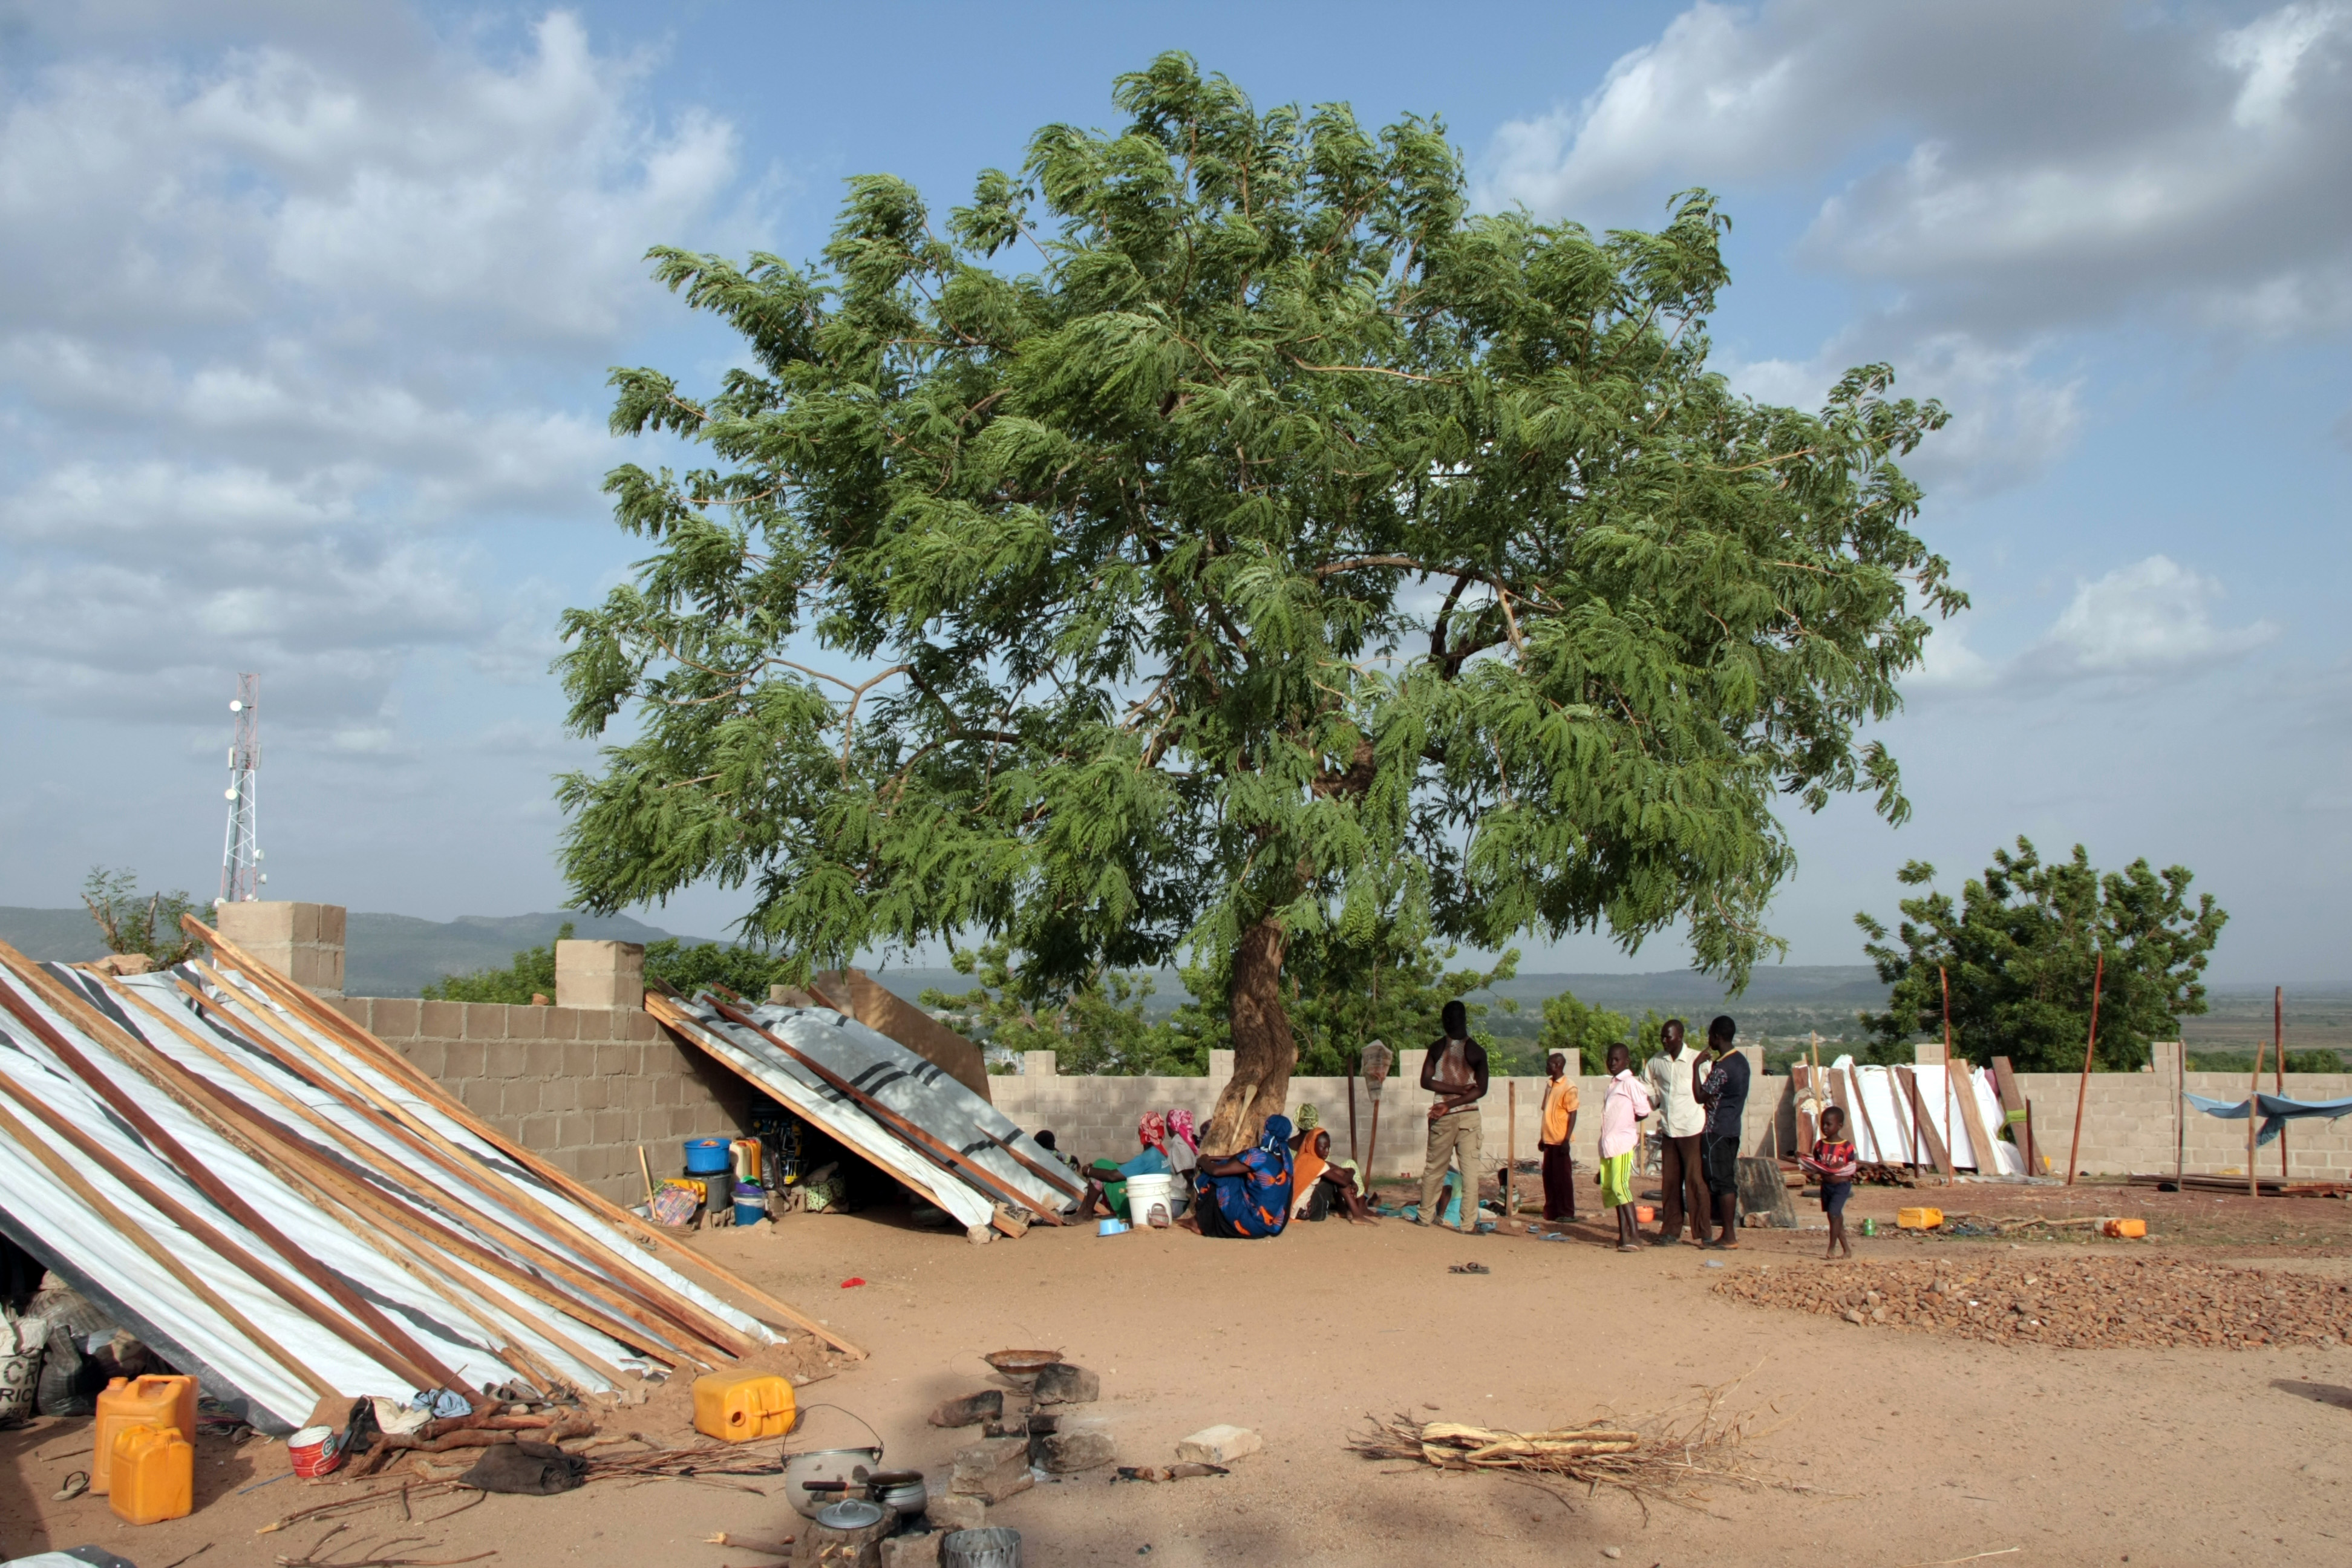 Internally displaced persons who fled from Boko Haram in the eastern Nigerian city of Yola